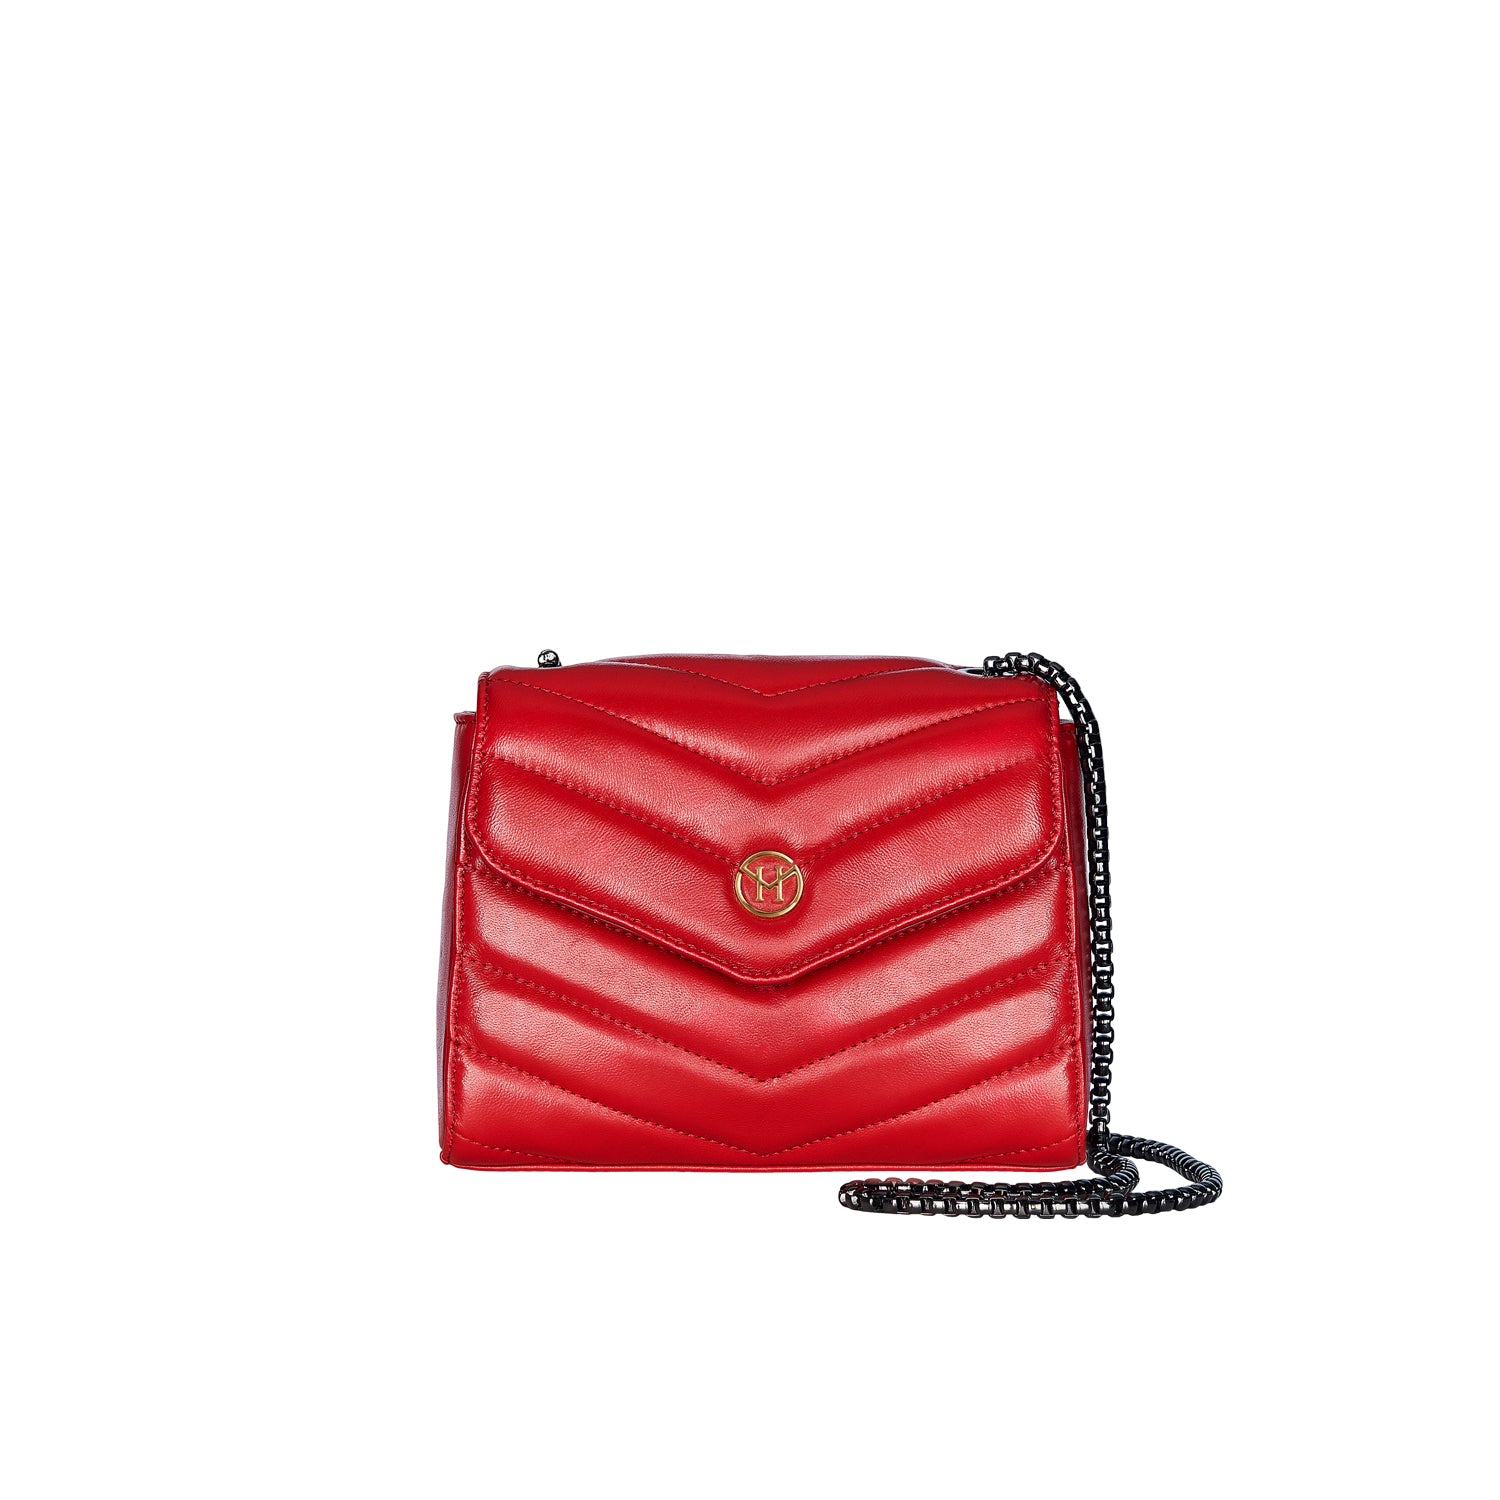 Handtasche New English Lady Bag in Rot